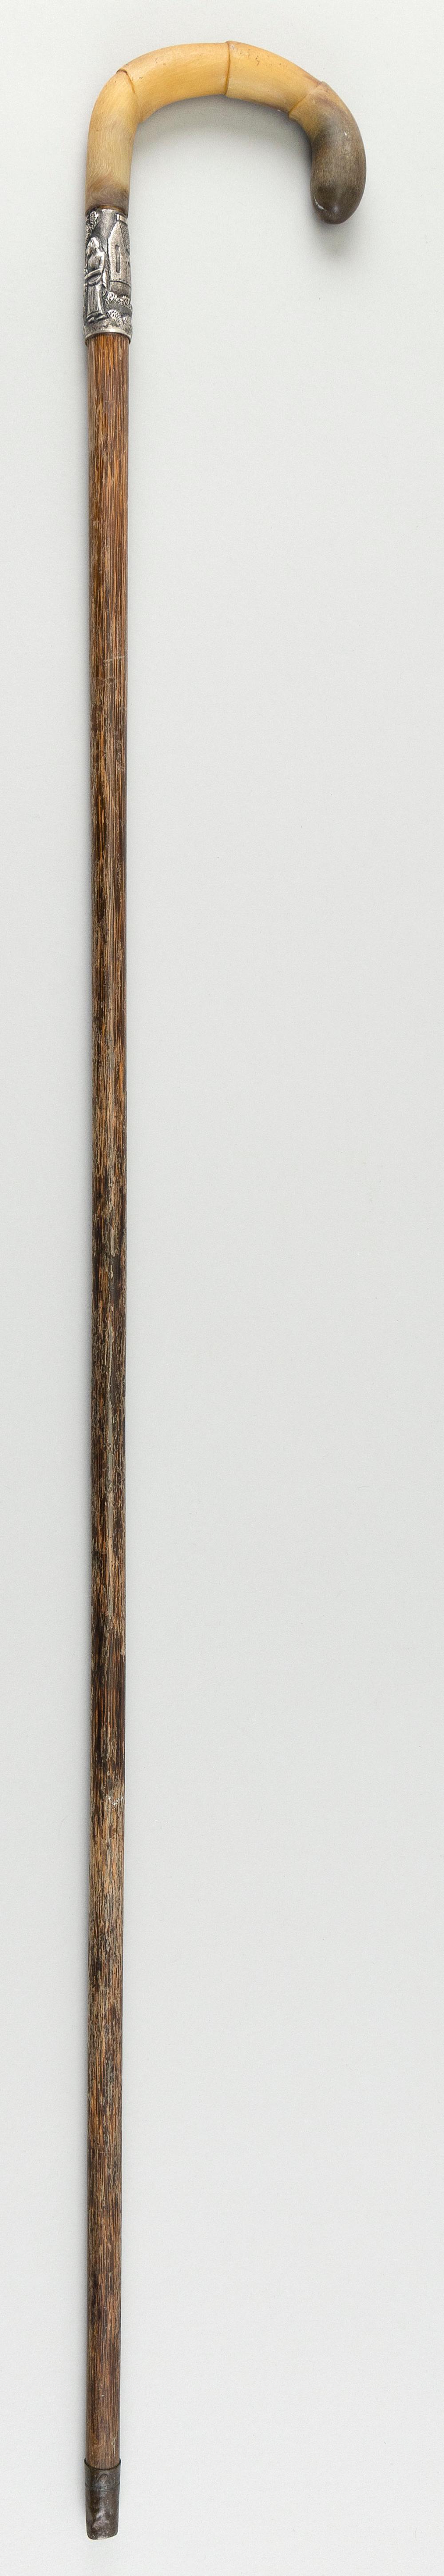 INDIAN WALKING STICK WITH SILVER